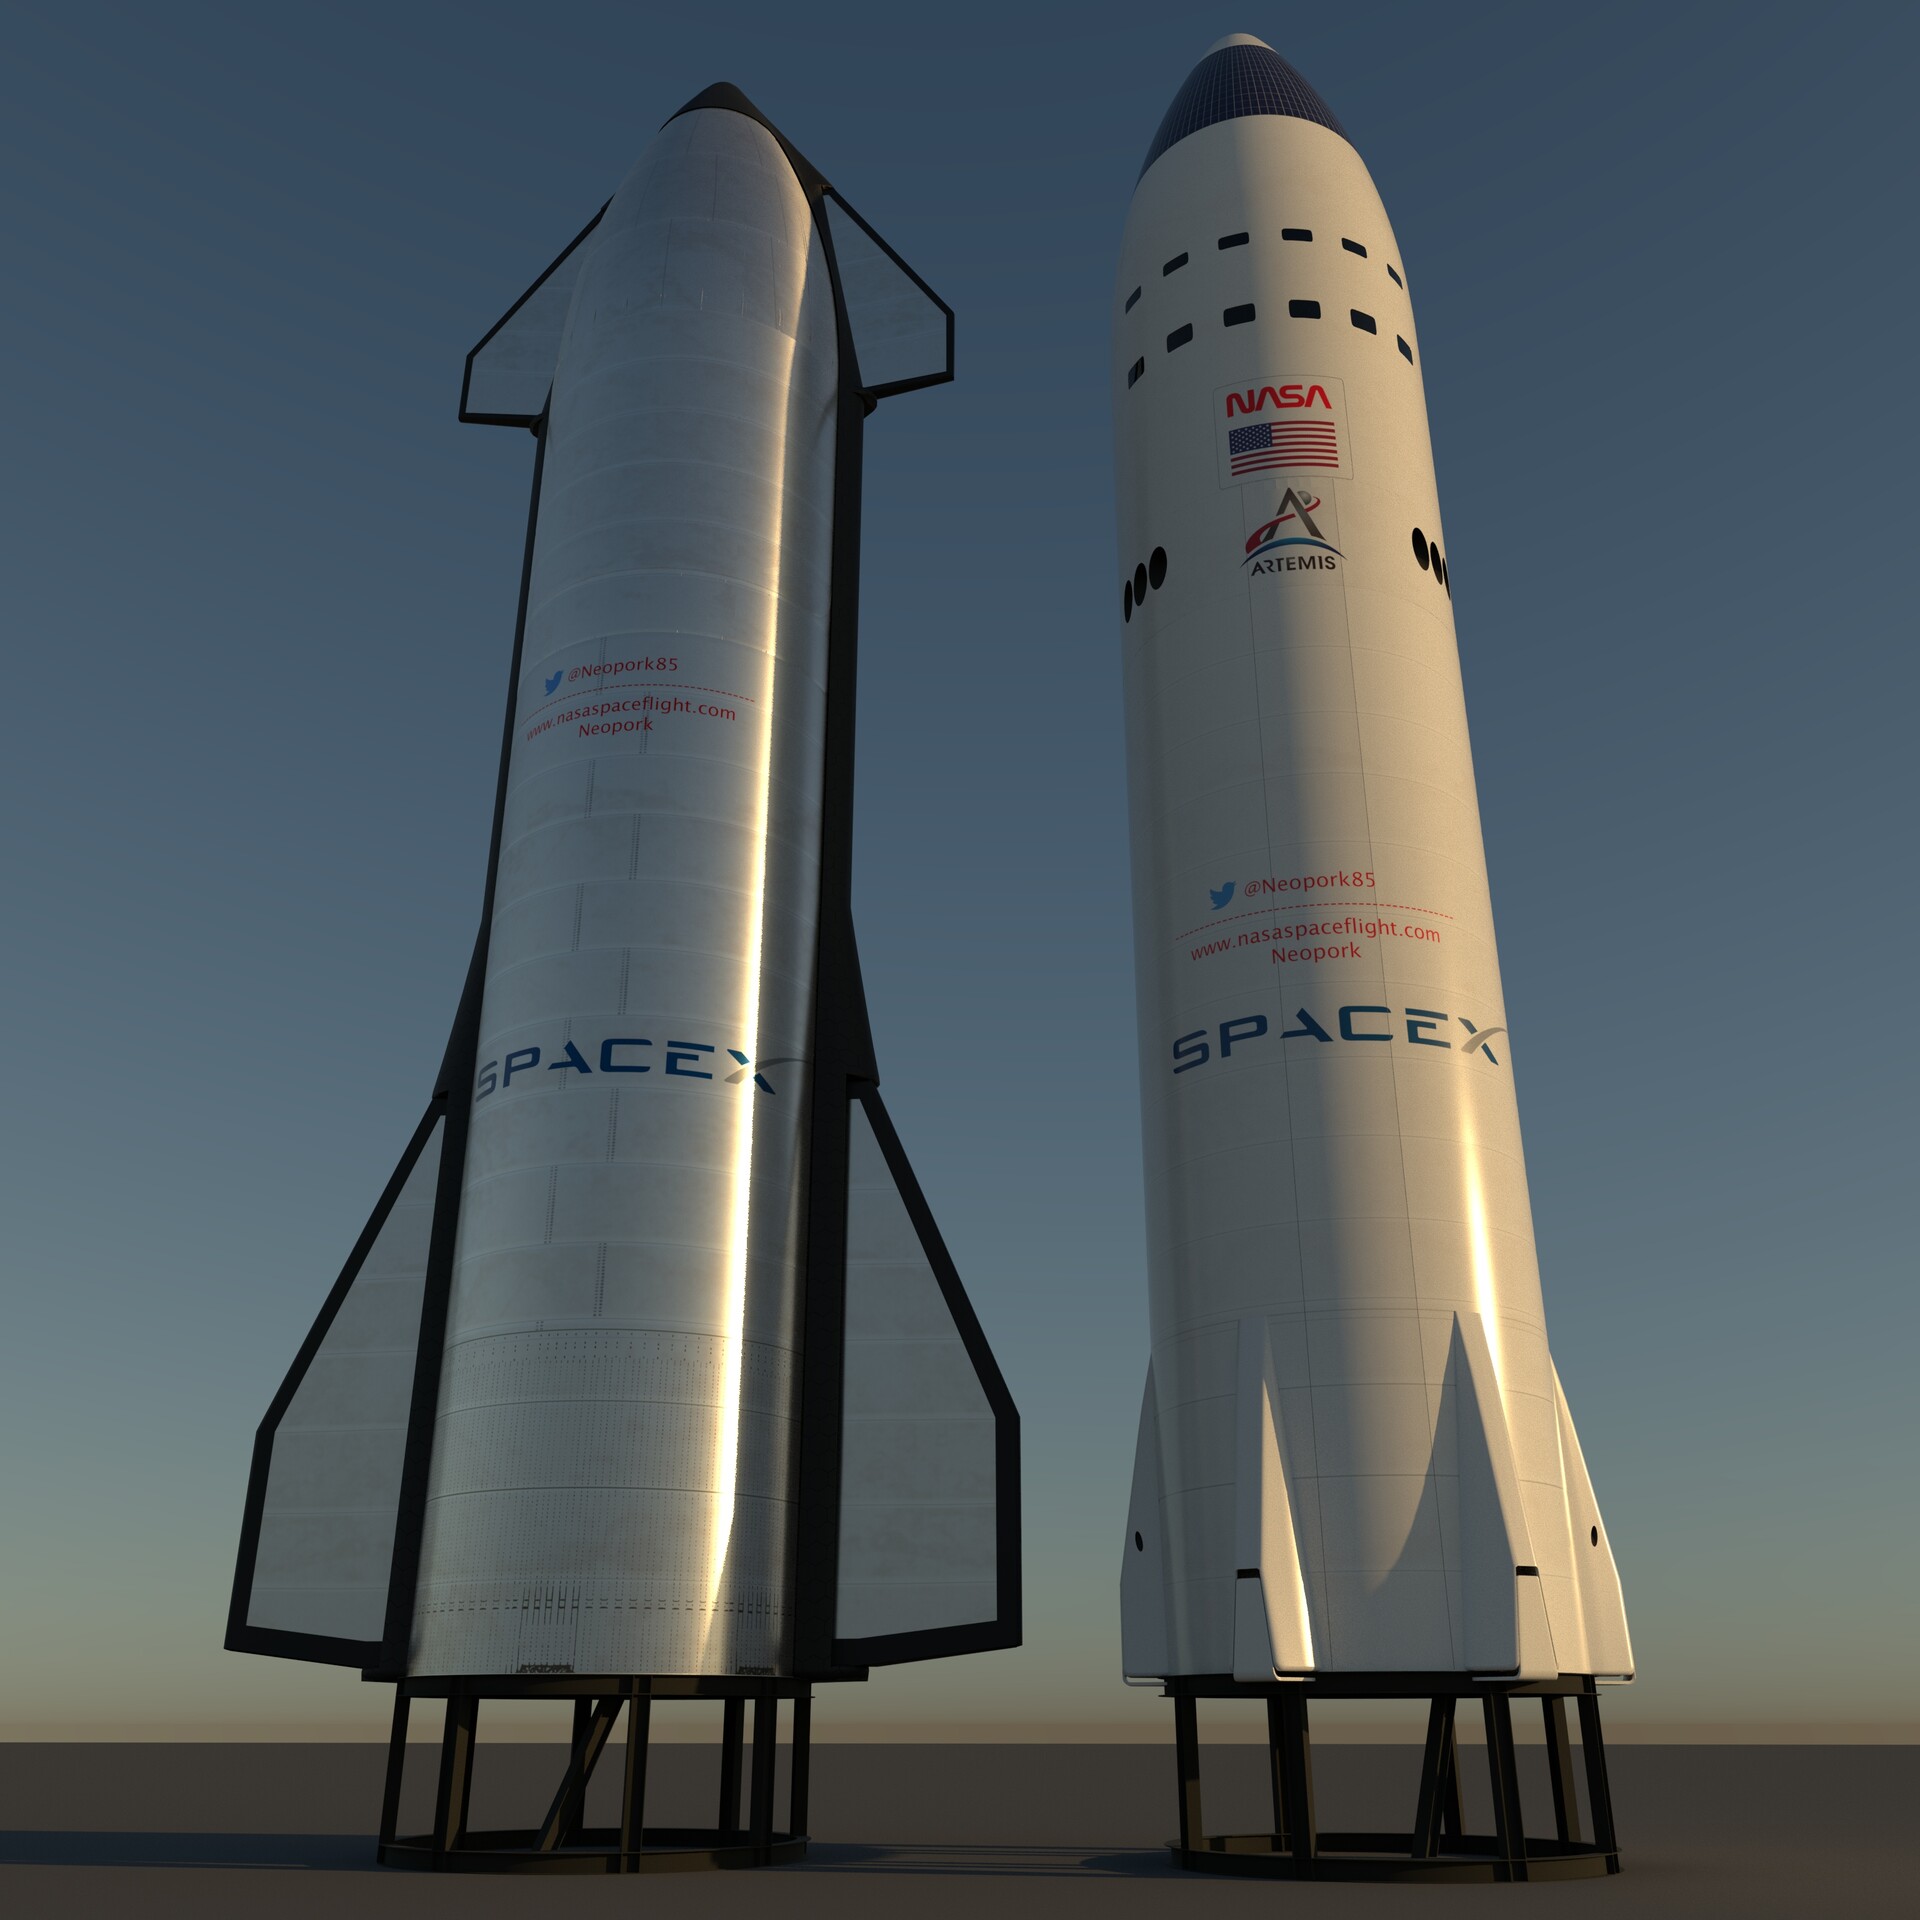 Starship маск. Ракета SPACEX Starship. SPACEX Старшип.